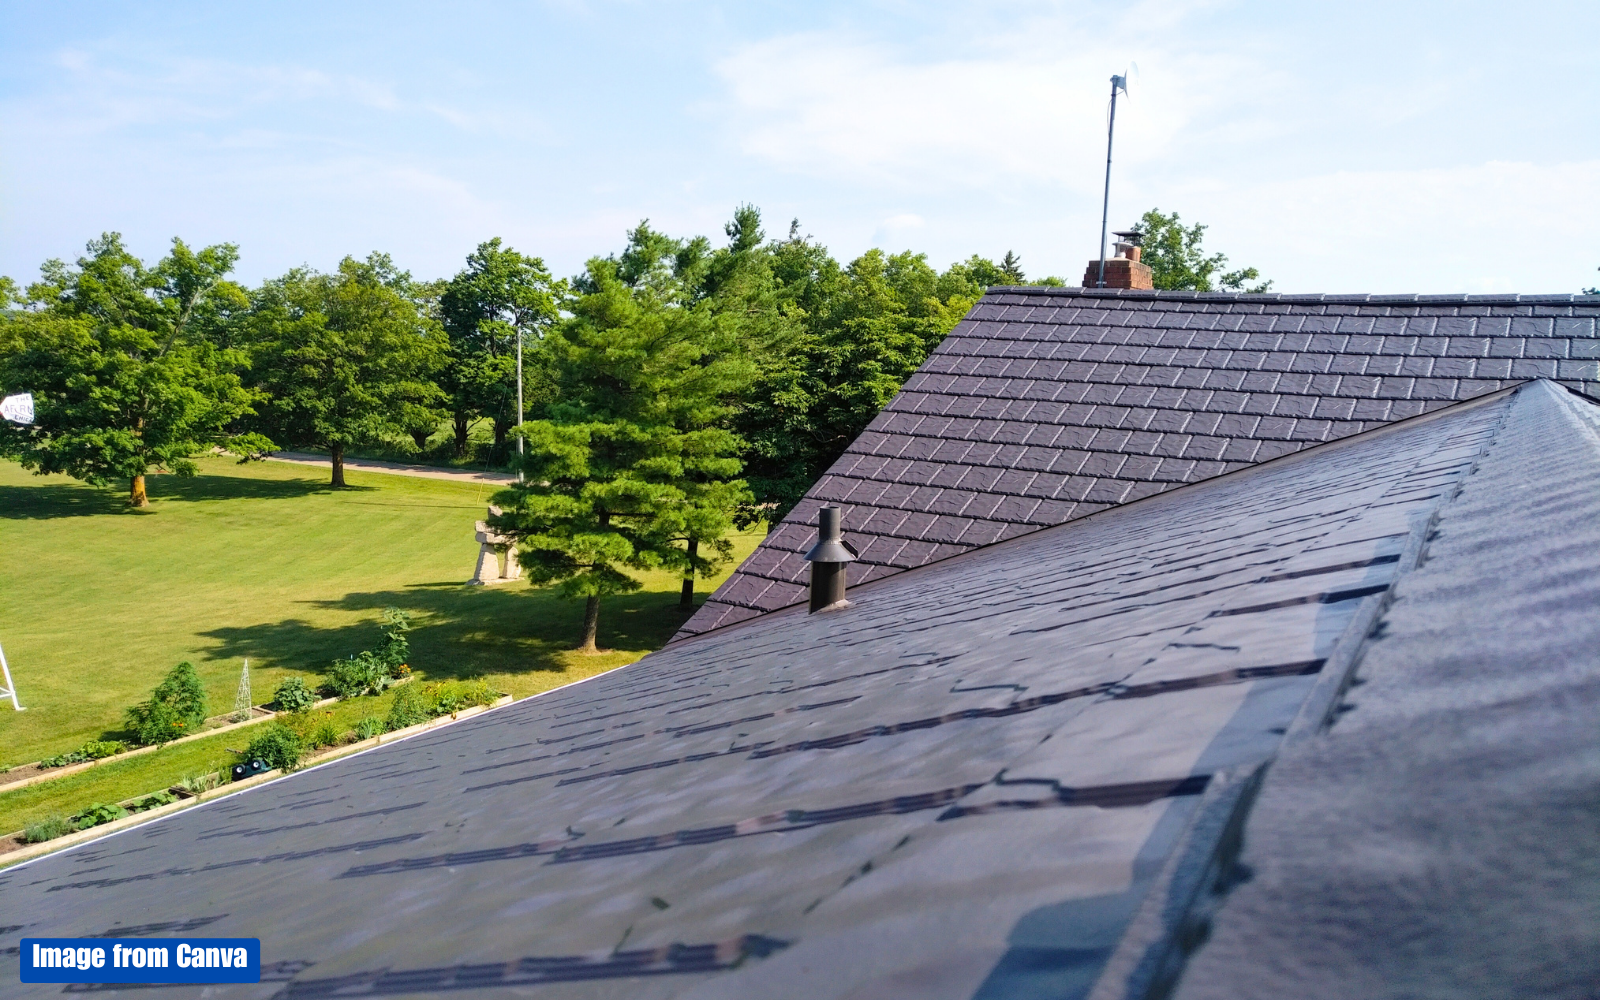 Slate Roof - one of the class A fire-resistant roofing materials